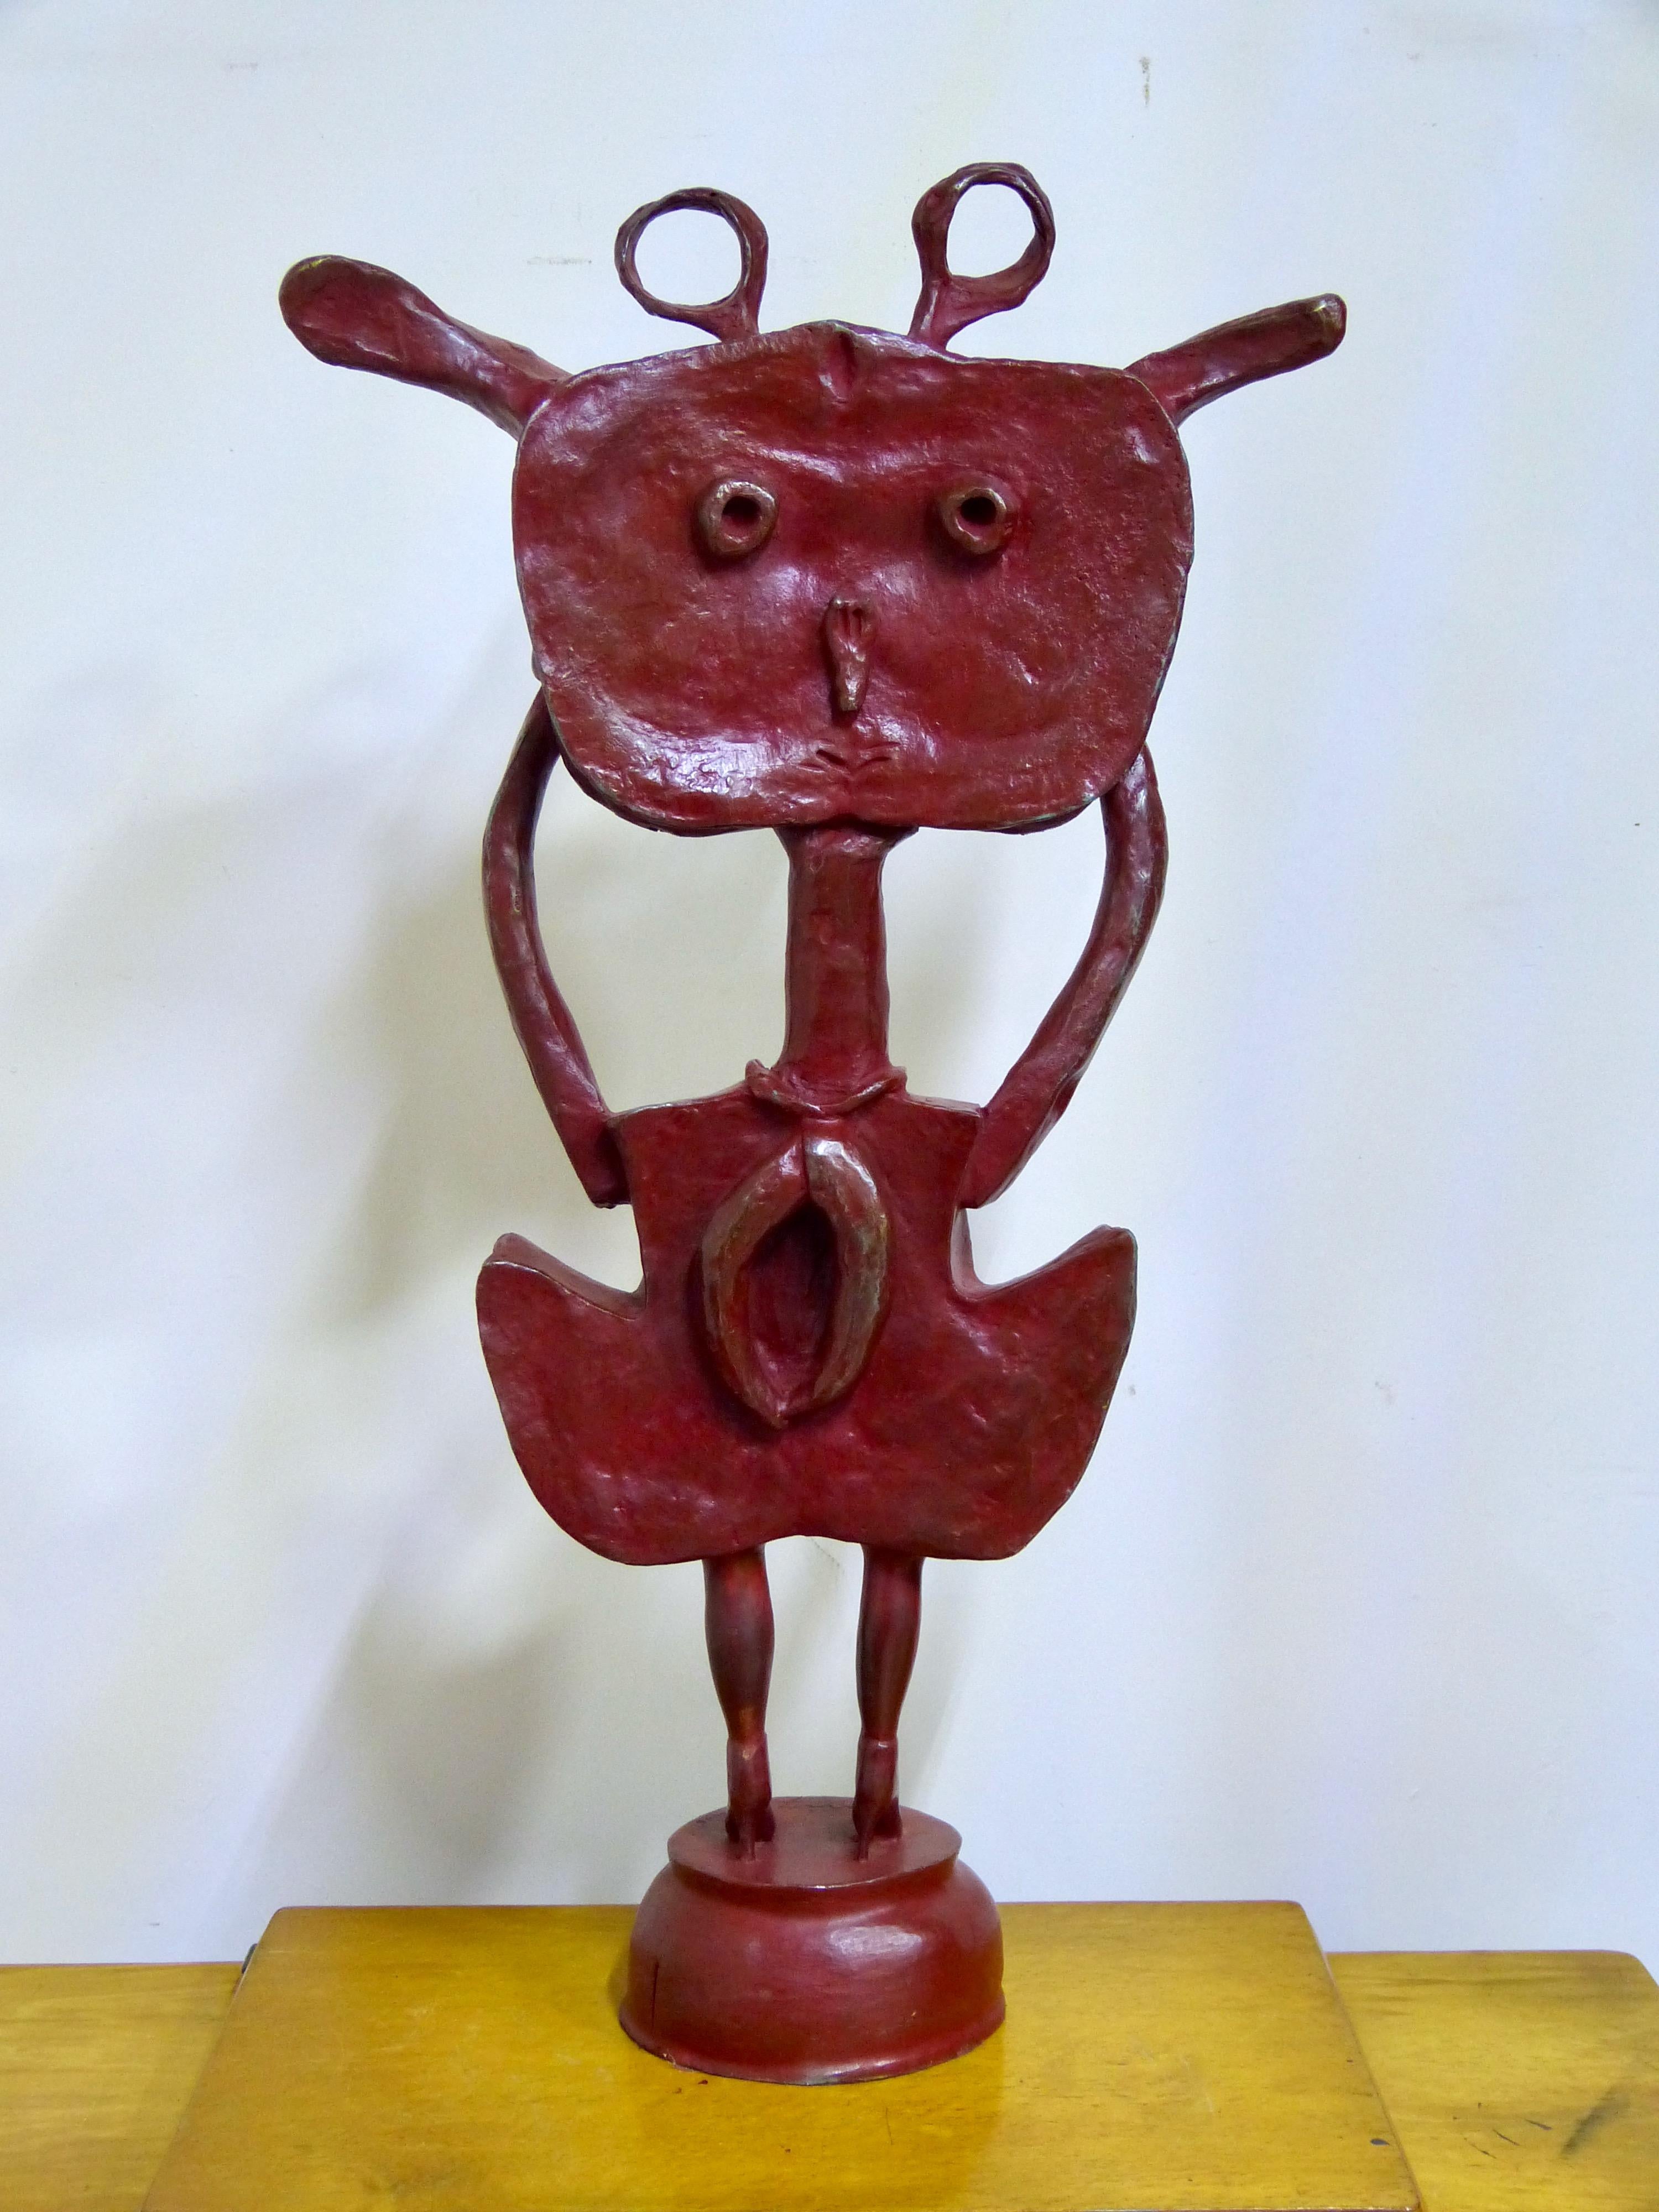 Title: Niña Cangrejo (Crab Girl)
Author: Sergio Hernandez
Year 2005
Made of Bronze
Edition: PA (Author´s Proof)
With 